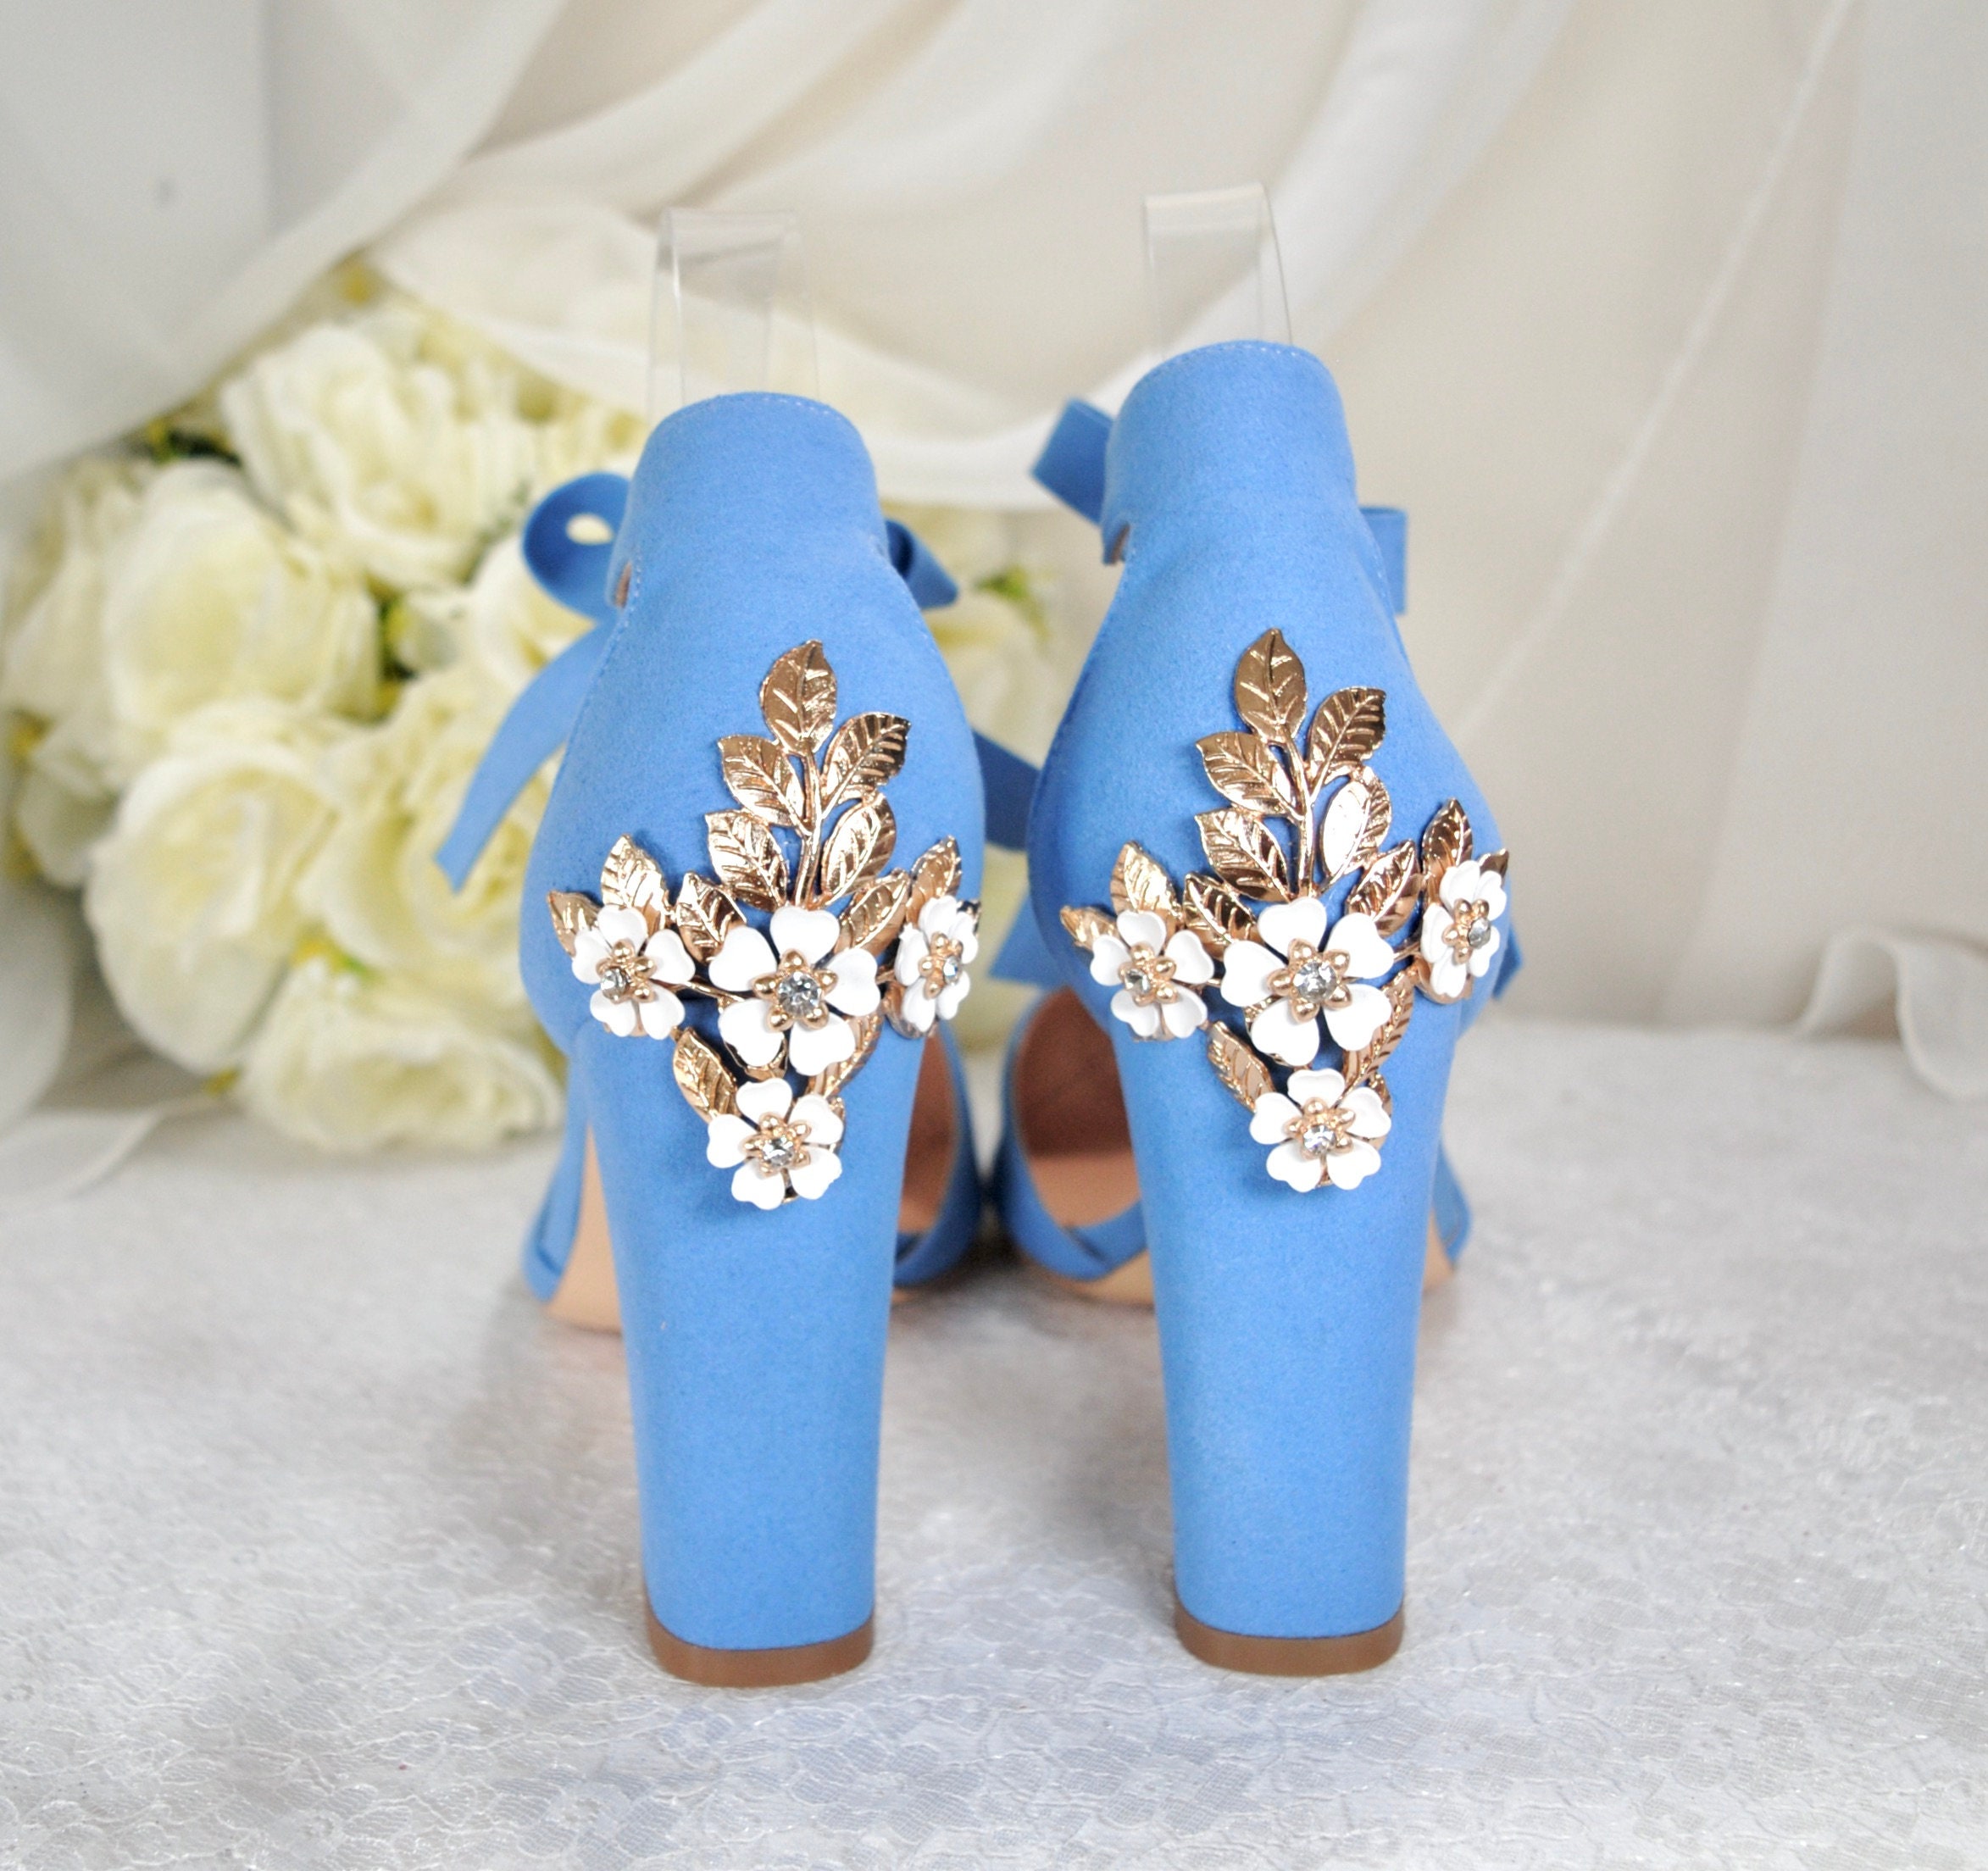 Anniv Coupon Below] Champagne Stiletto Heel Silk Wedding Shoes For Bride  Beaded Luxury Designer Heels Poined Toe Rhinestones Bridal Shoes With  Buckle 2437 From Erdft01, $52.71